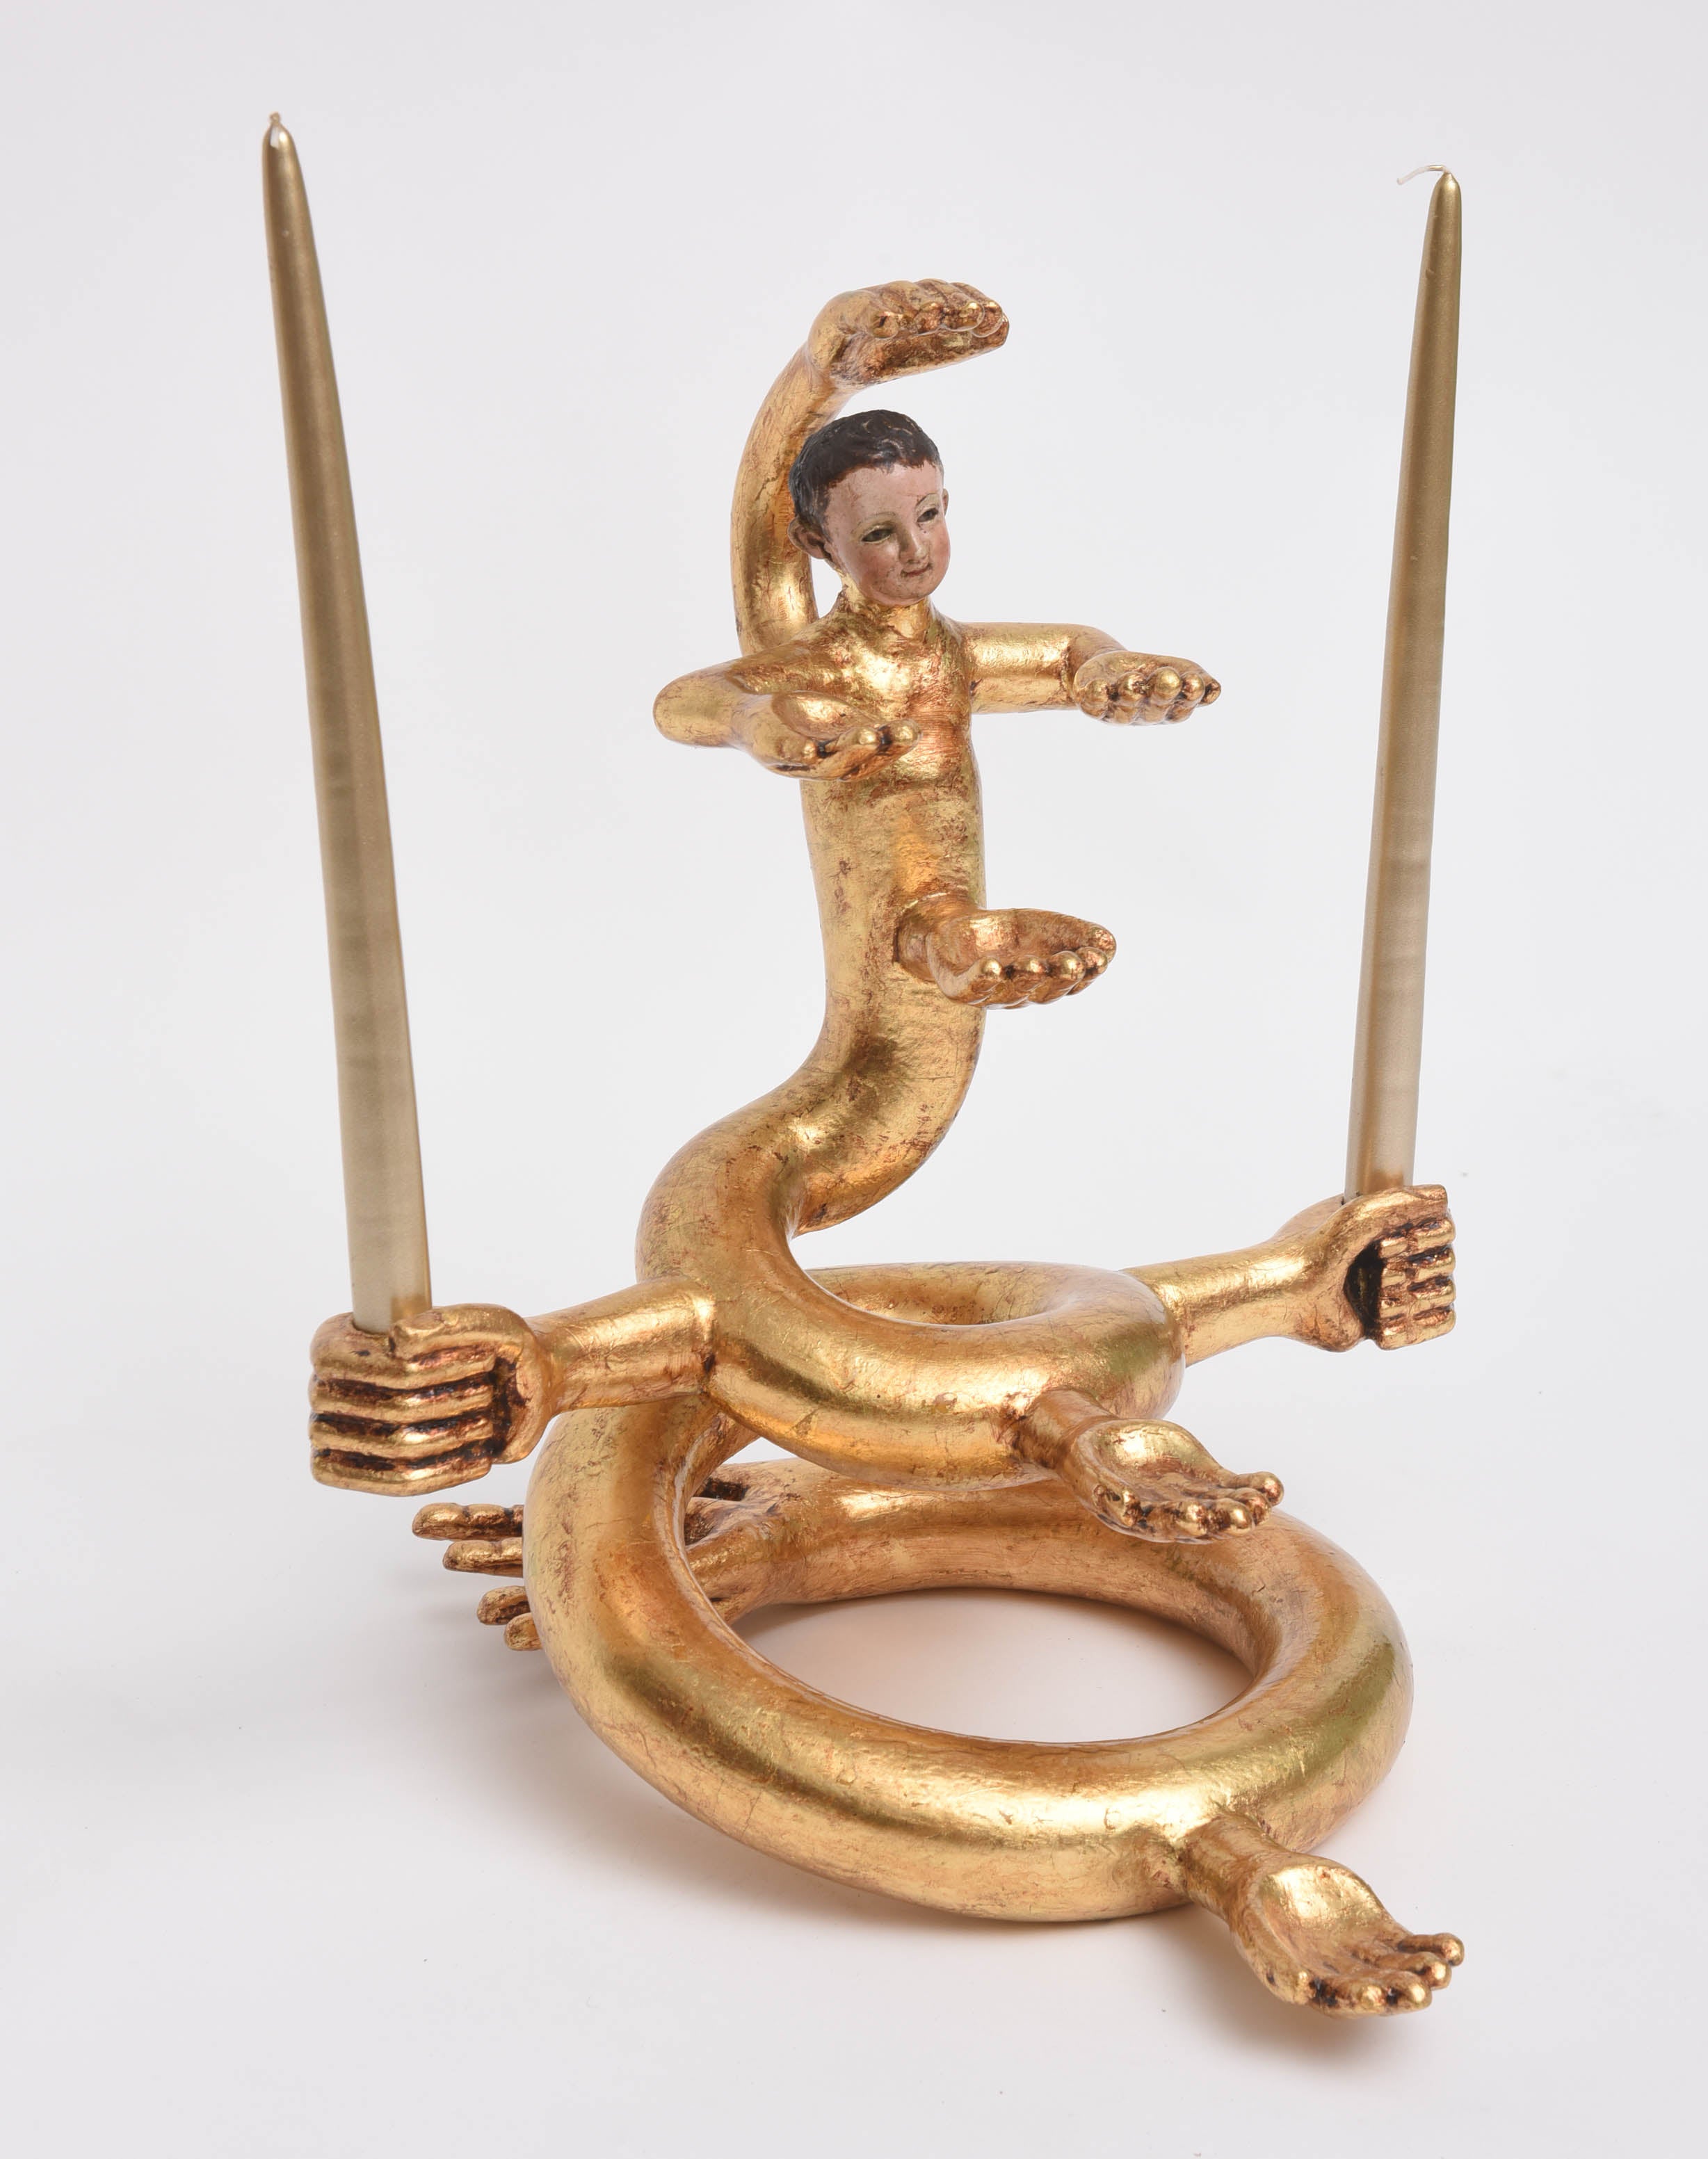 Surrealistic candleholder by Mexican artist and designer Pedro Friedeberg.